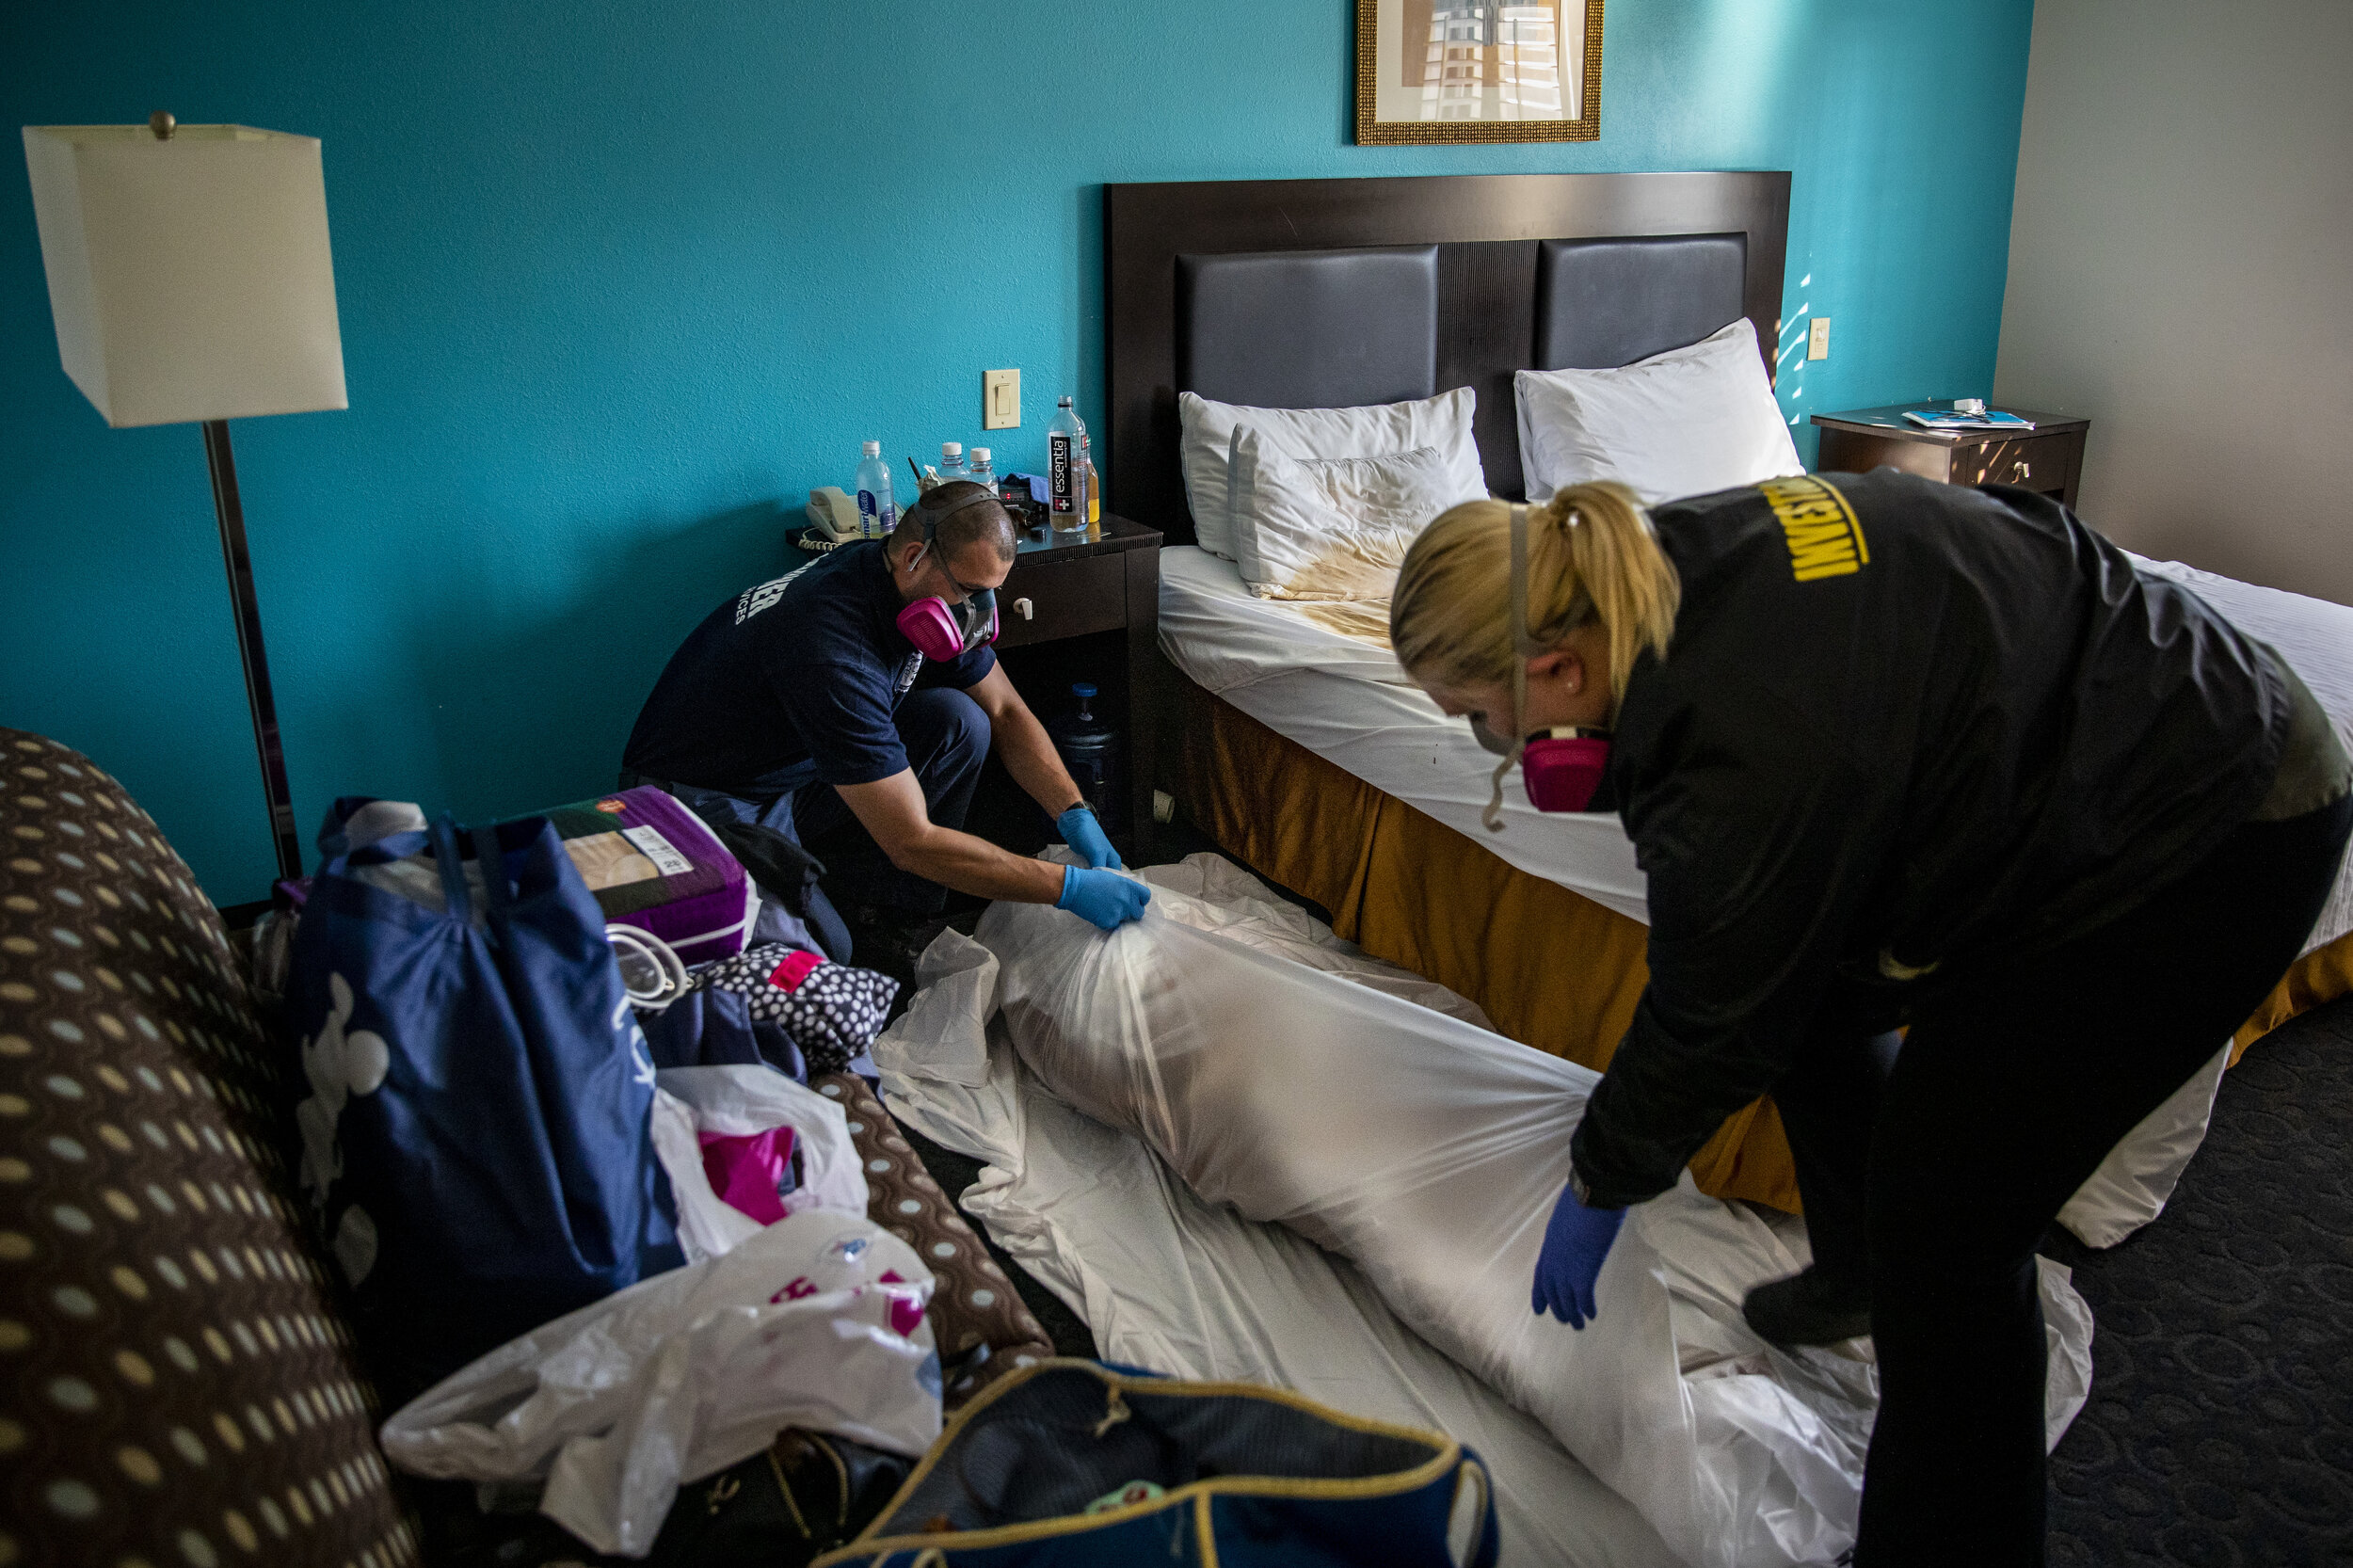   Kristina McGuire, an investigator with the Los Angeles County Dept. of Medical Examiner-Coroner, right and Jerry Meza, forensic attendant, prepare to transport the lifeless body of Judy Bounthong, 58, an ob-gyn tech at Emanate Queen of the Valley H